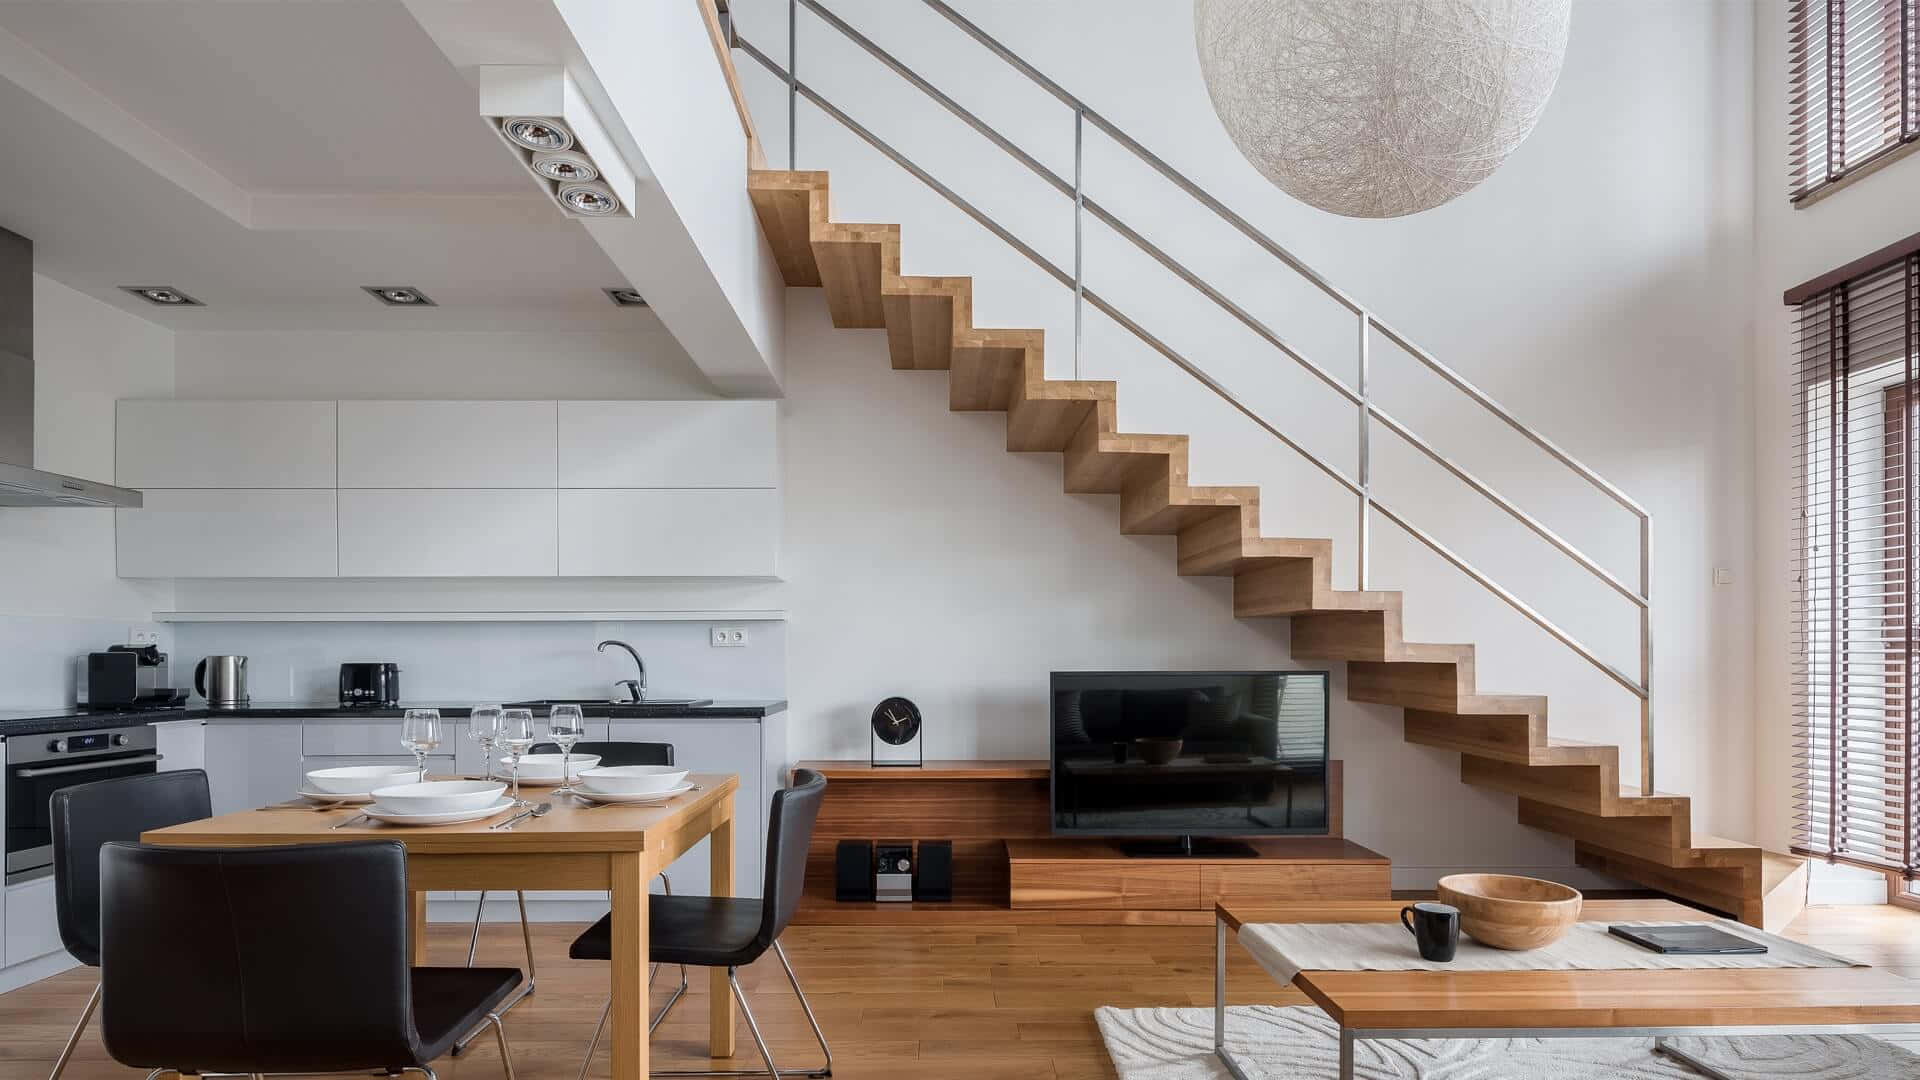 A Kitchen And Dining Area With Stairs